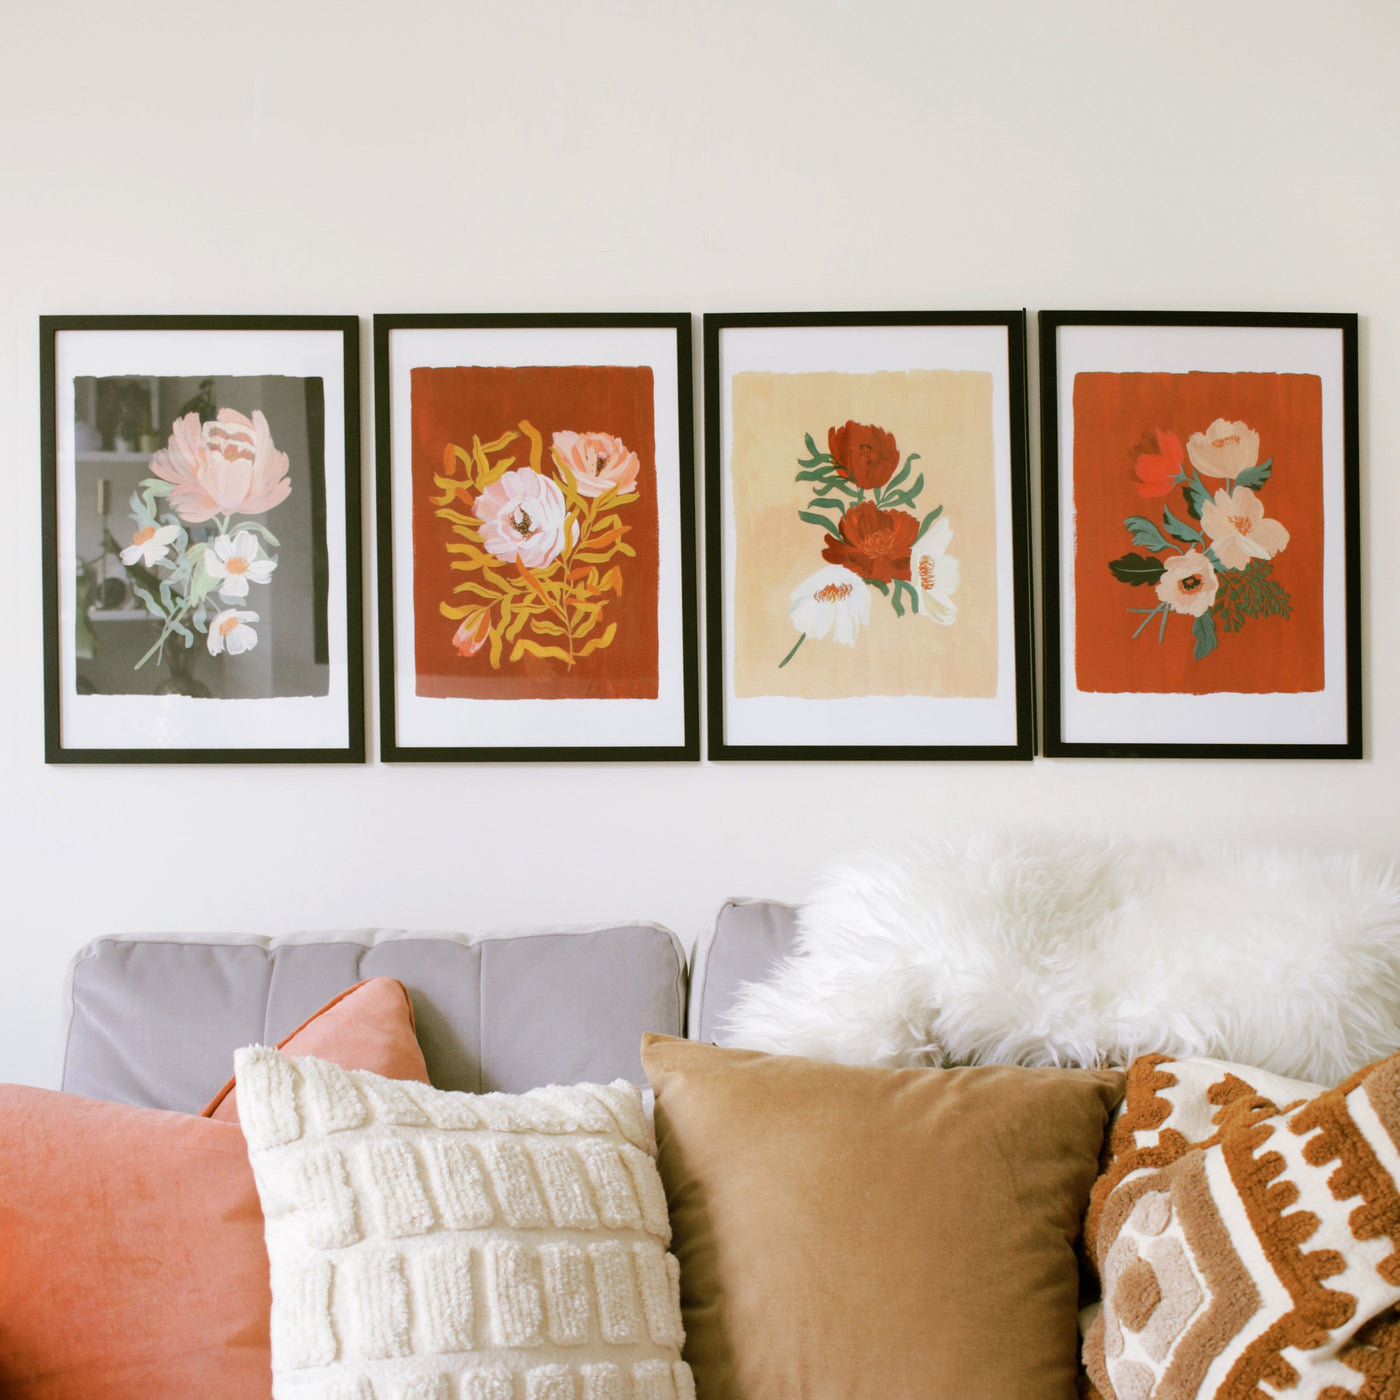 Red Floral Botanical Art Print With A Spray of Anemone Flowers On A Deep Red Background With Three Other Botanical Prints Hanging On The Wall - Annie Dornan Smith